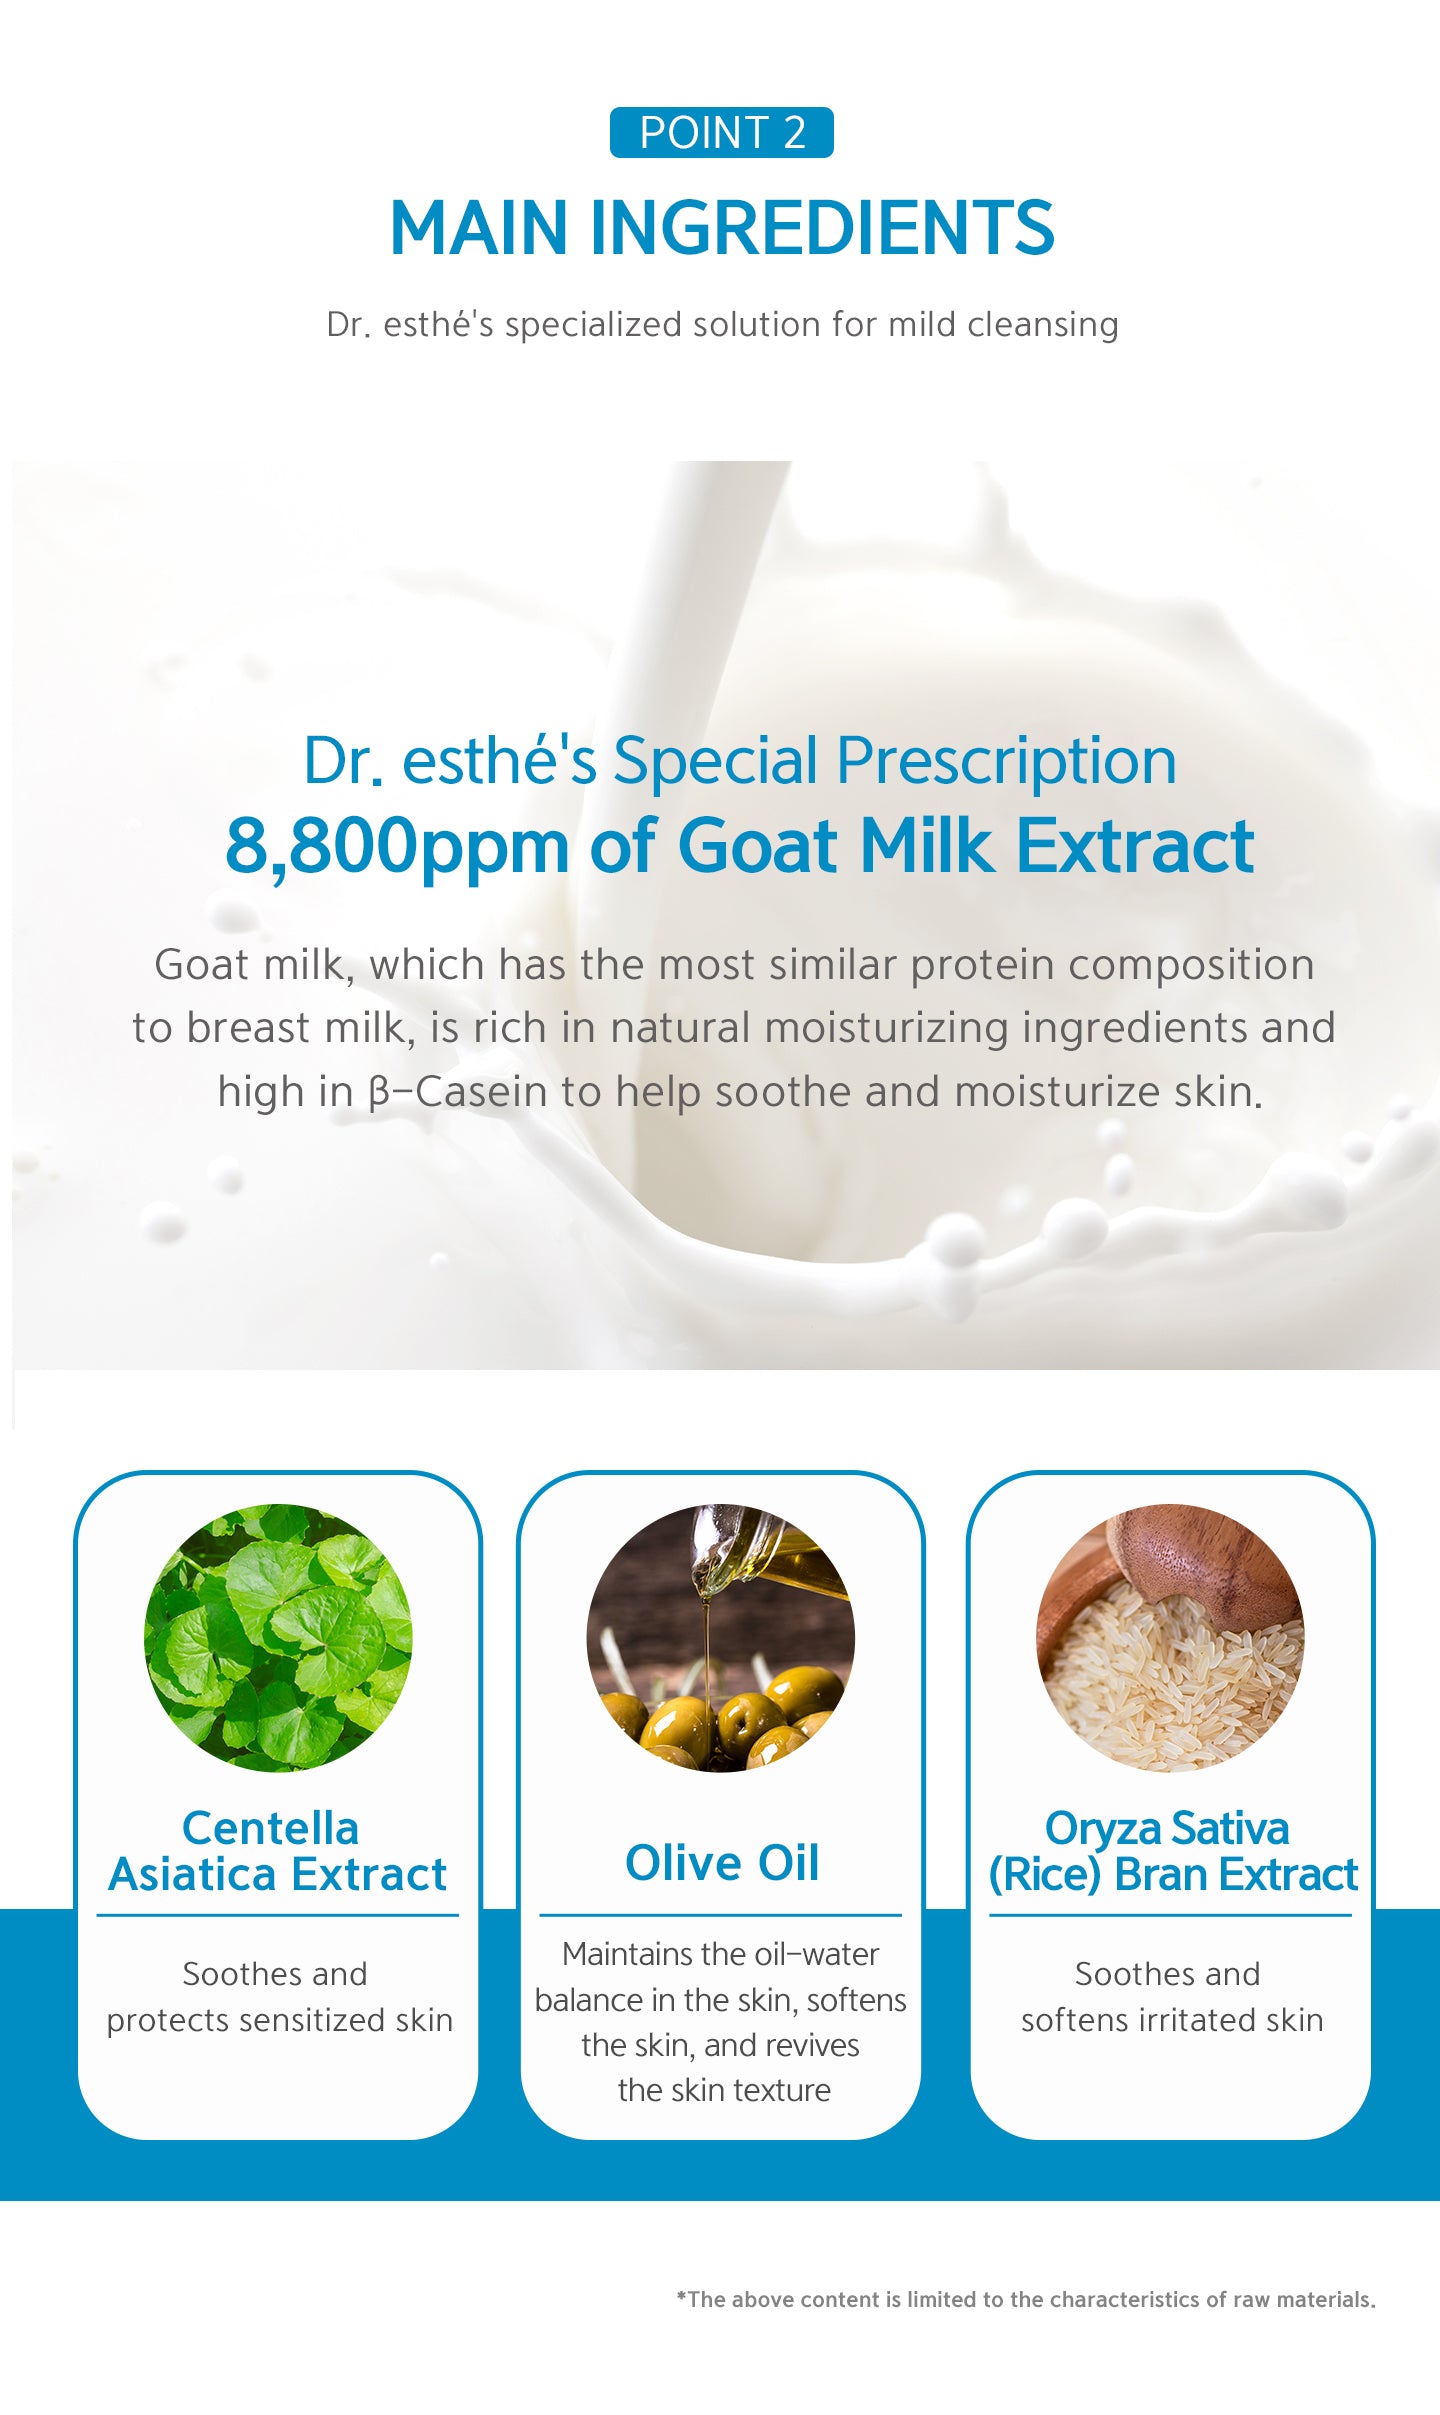 Dr.esthe's special prescription 8800 ppm of goat milk extract. Goat milk, which has the most similar protein composition to breast milk, is rich in natural moisturizing ingredients to help soothe and moisturize skin. Centella asiatica extract, olive oil